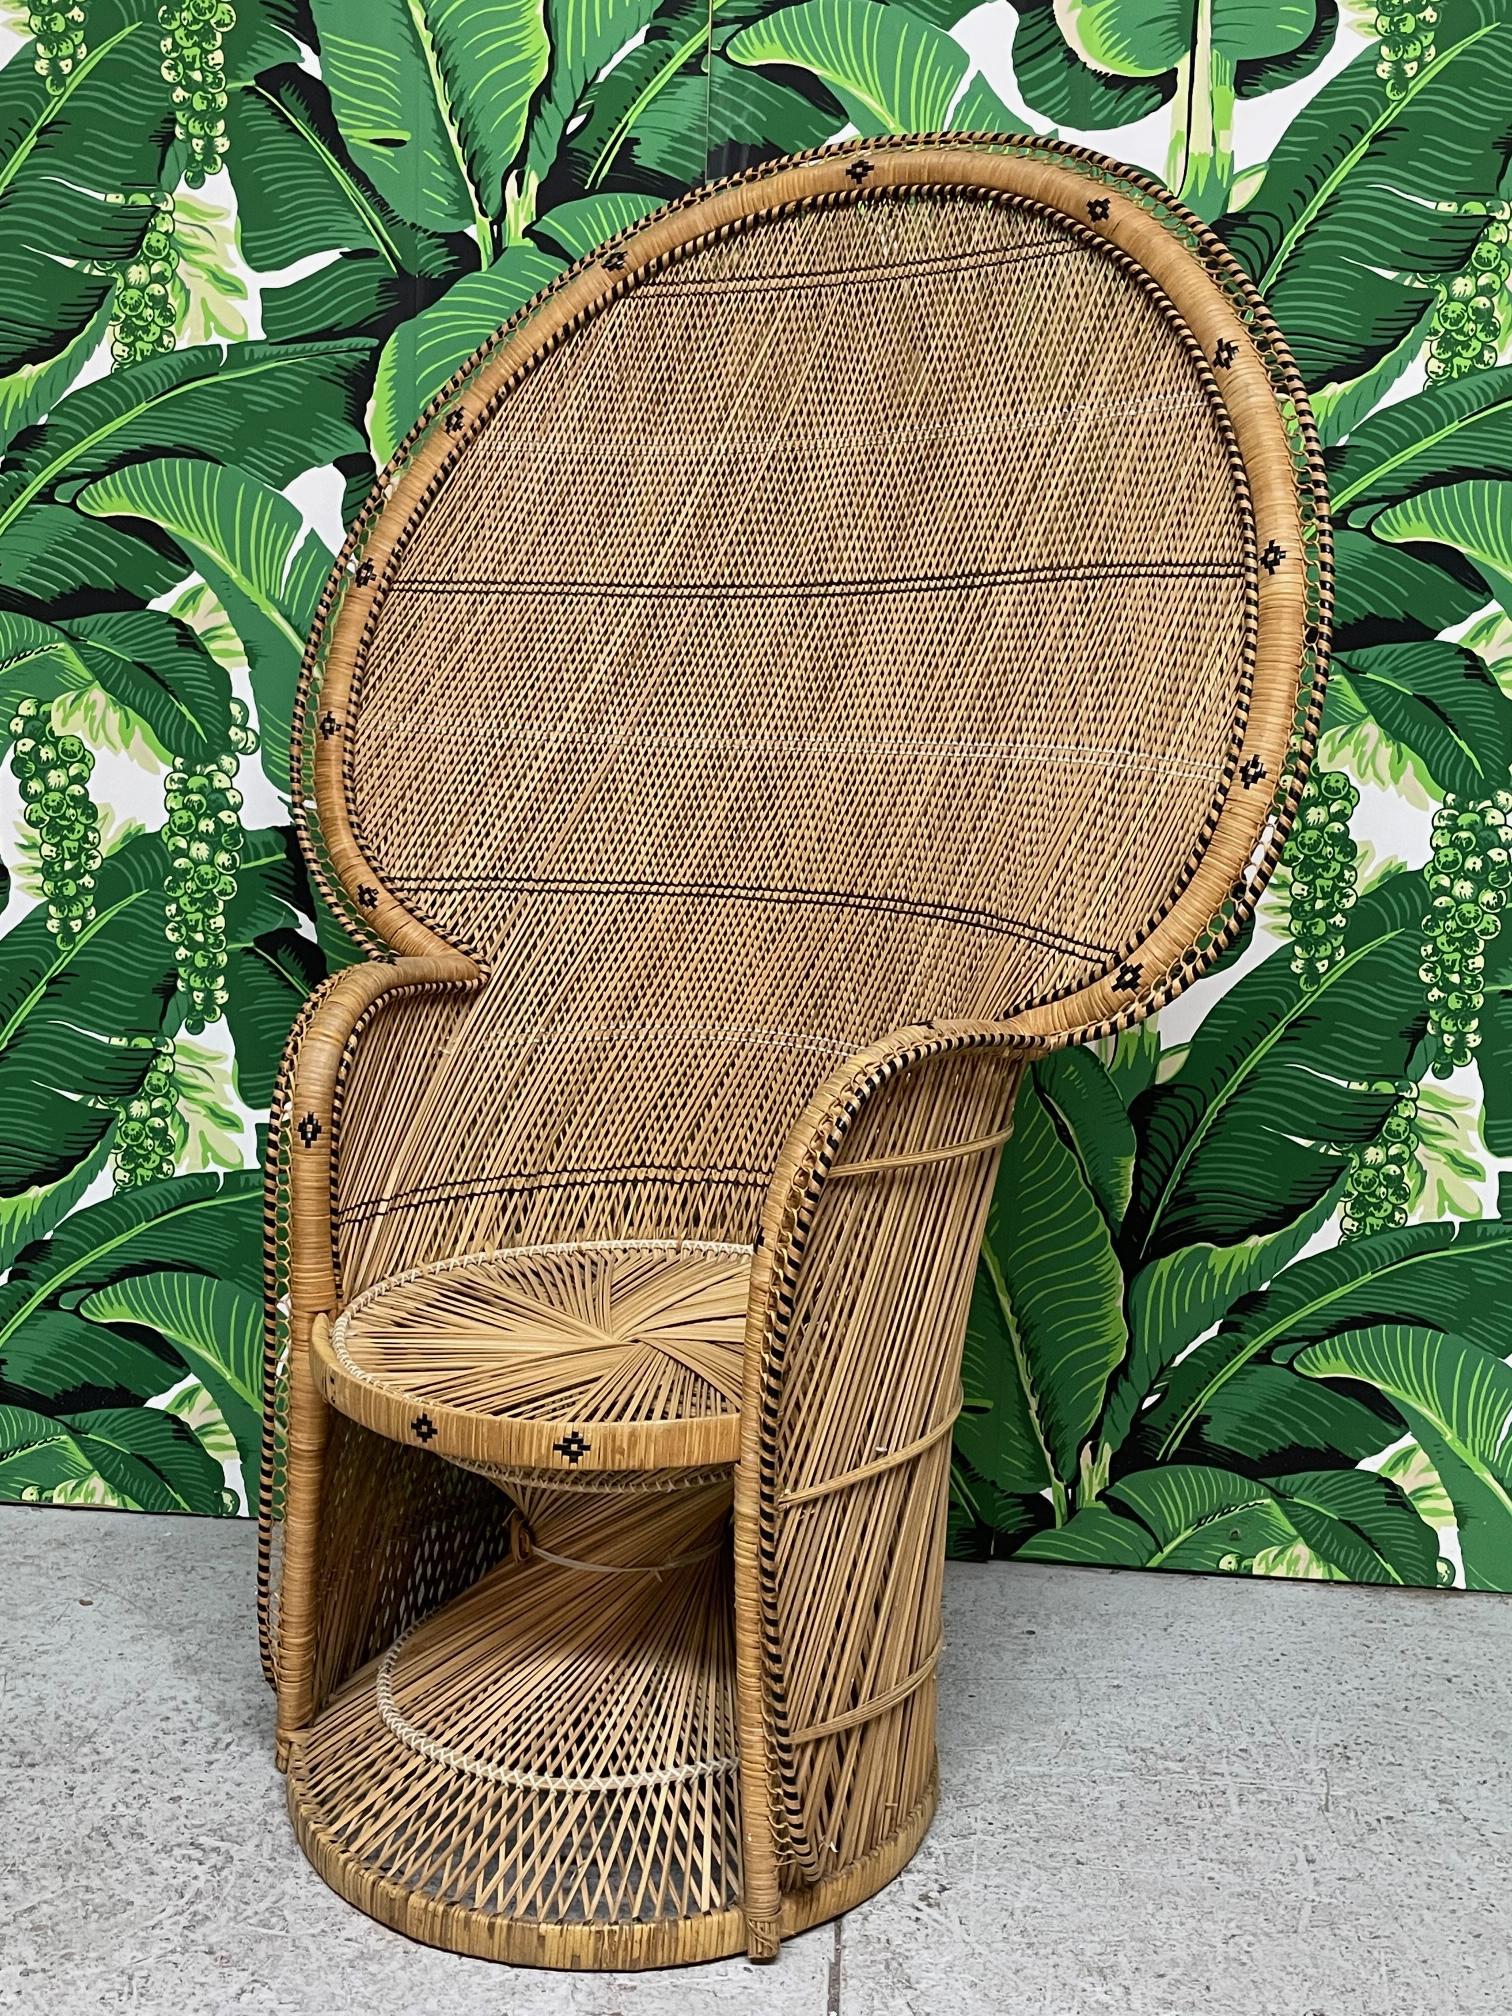 Vintage wicker peacock chair features a fine cross-weave pattern and intricate black rattan detailing. Twisted design base and large fan back. Good condition with minor imperfections consistent with age, see photos for condition details.
For a